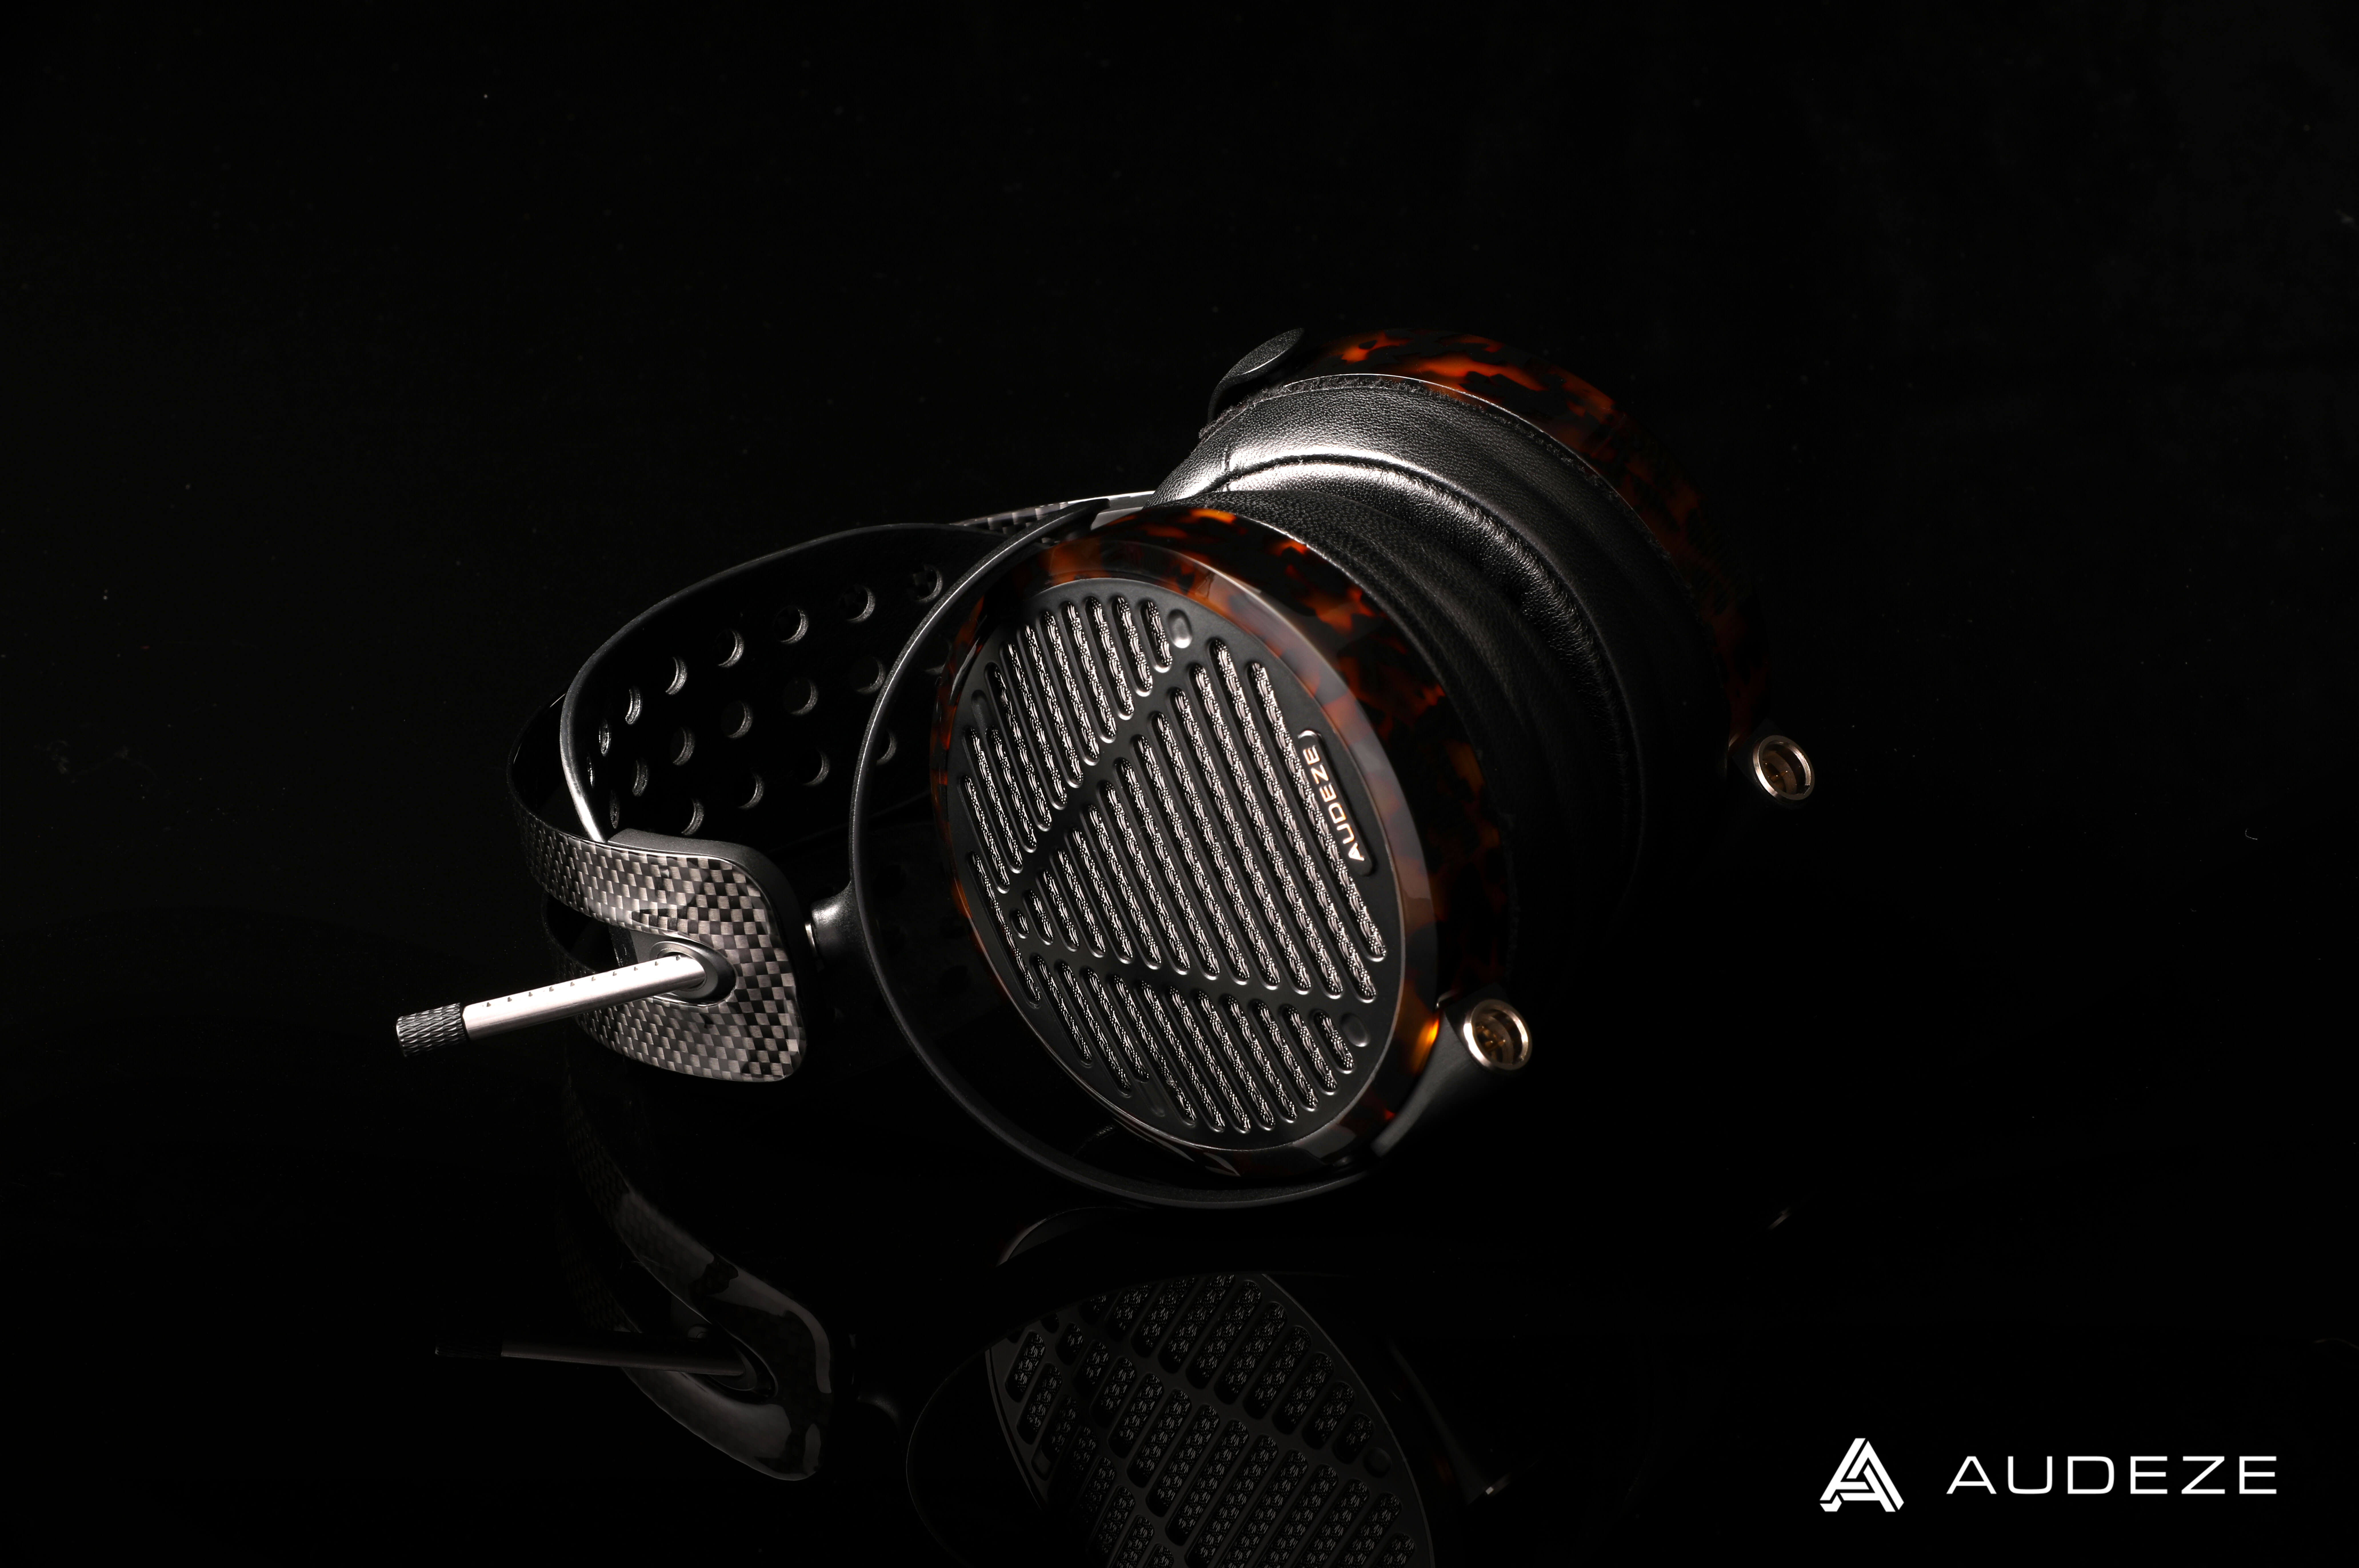 AUDEZE ANNOUNCES NEW LCD-5 FLAGSHIP  REFERENCE HEADPHONES